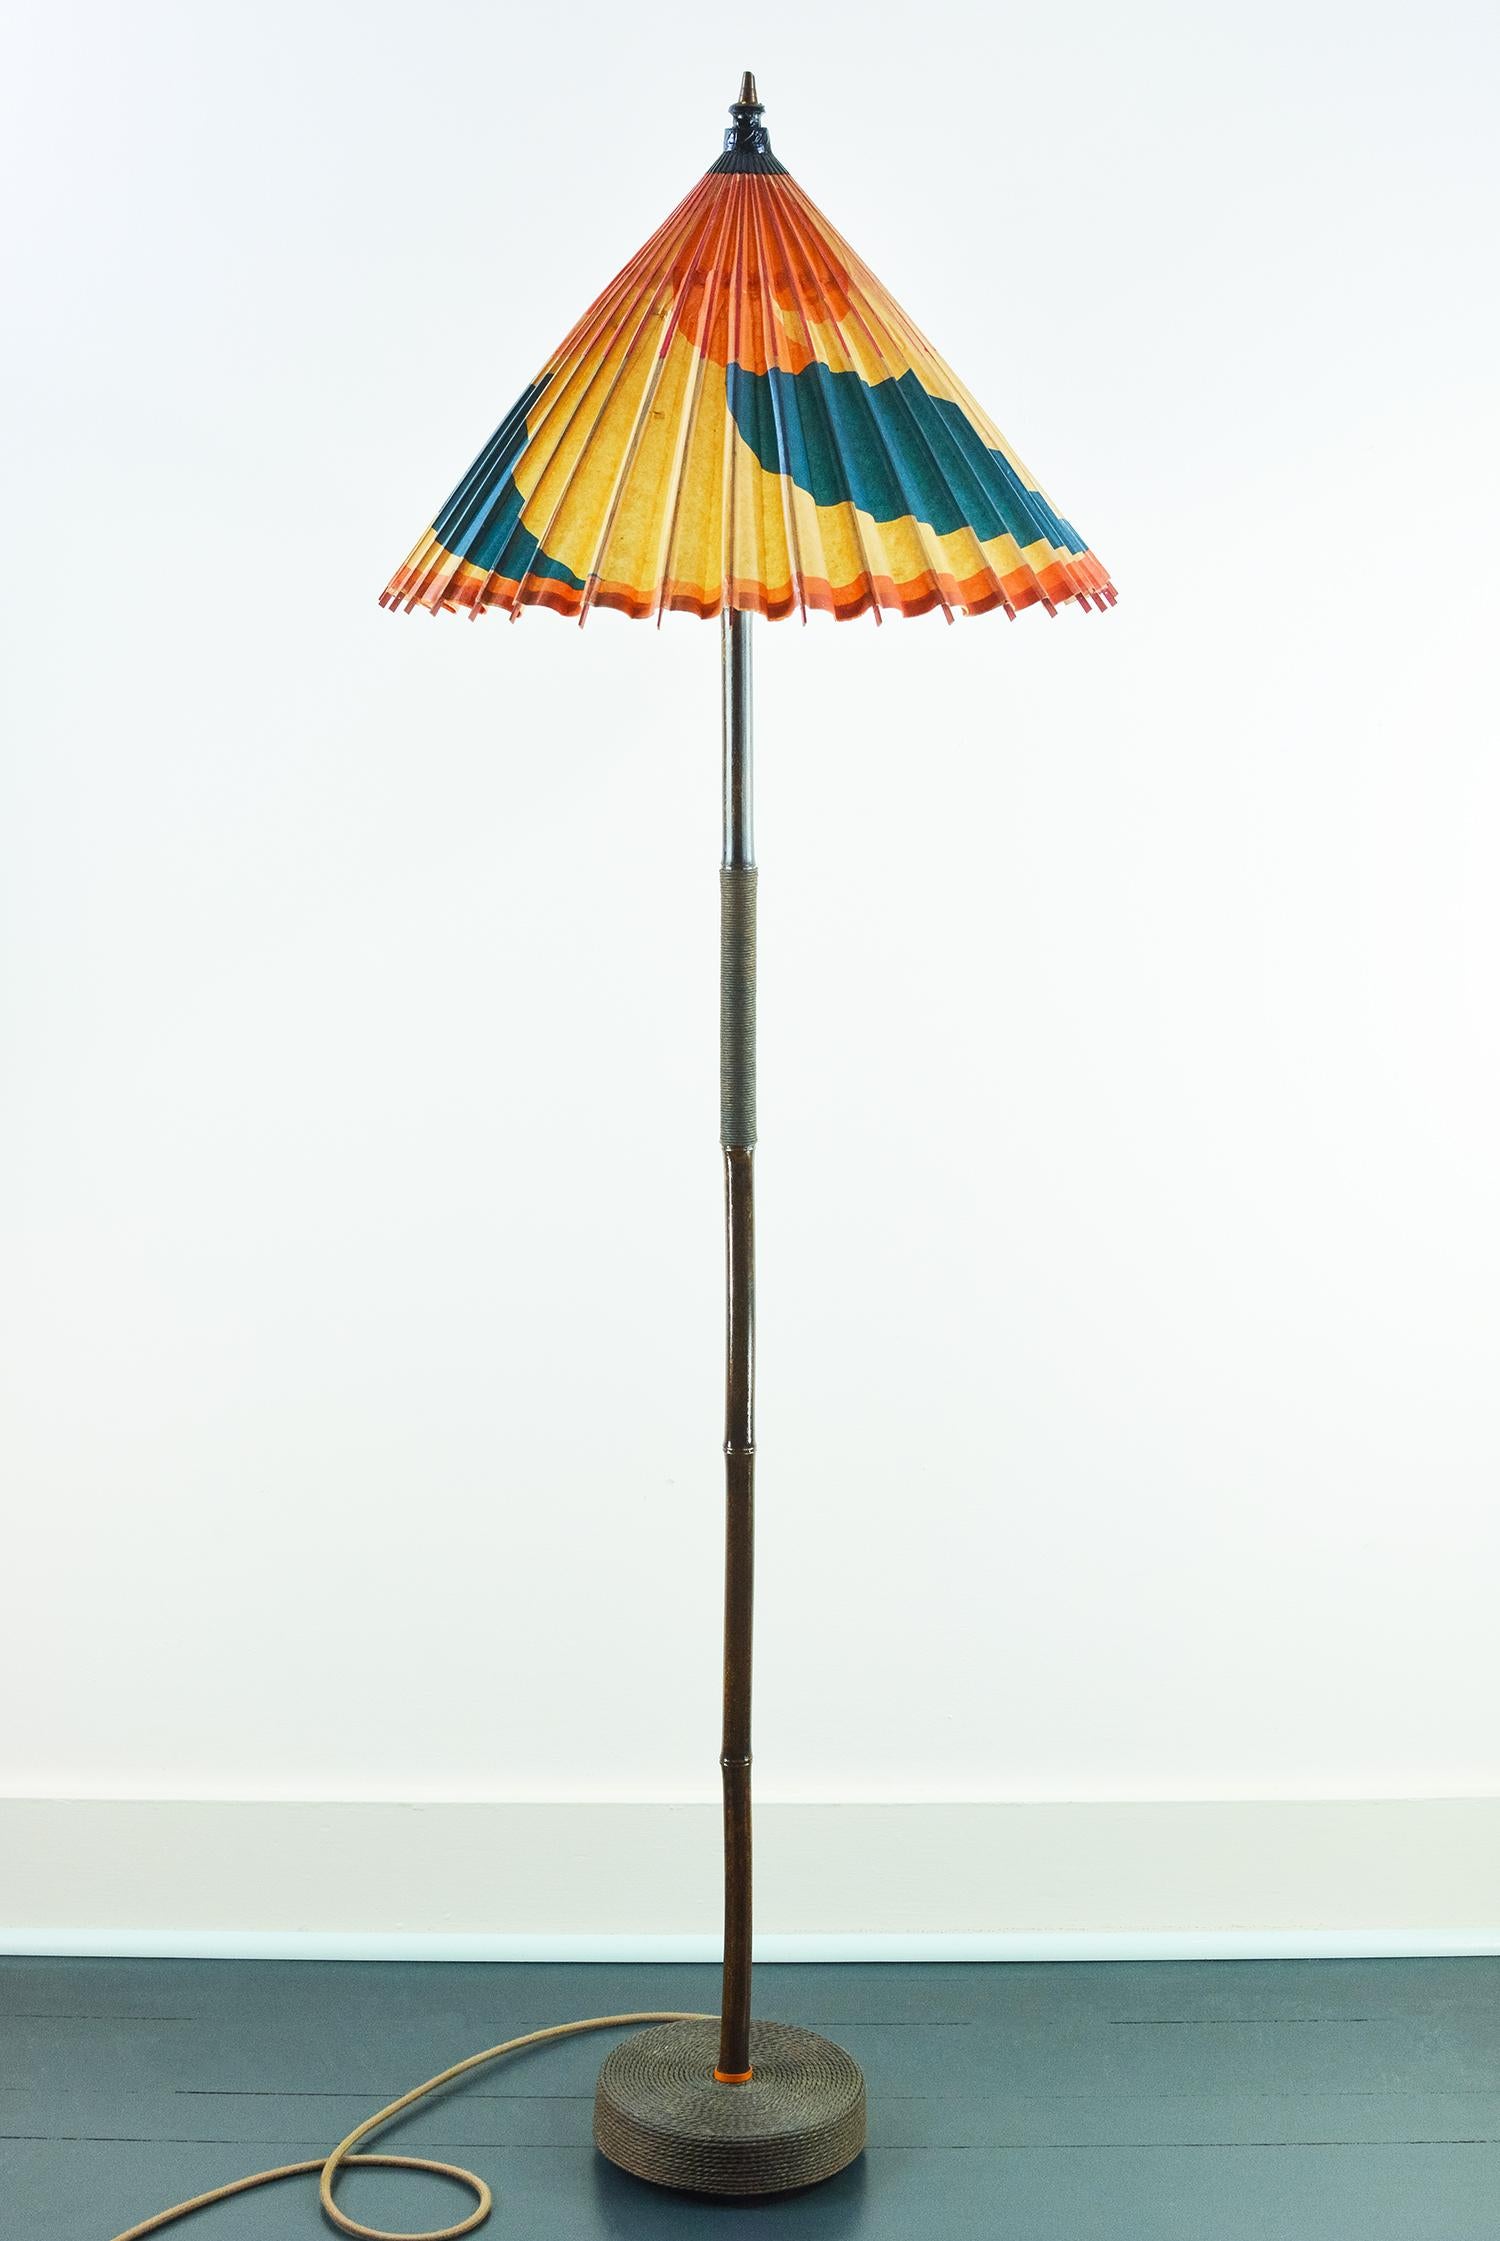 The World’s Fair Collection is a family of fixtures handmade from sustainably sourced materials and upcycled antique paper parasols given to visitors at the 20th century’s most illustrious cultural expo.

Model No. 001A features an oil-paper shade